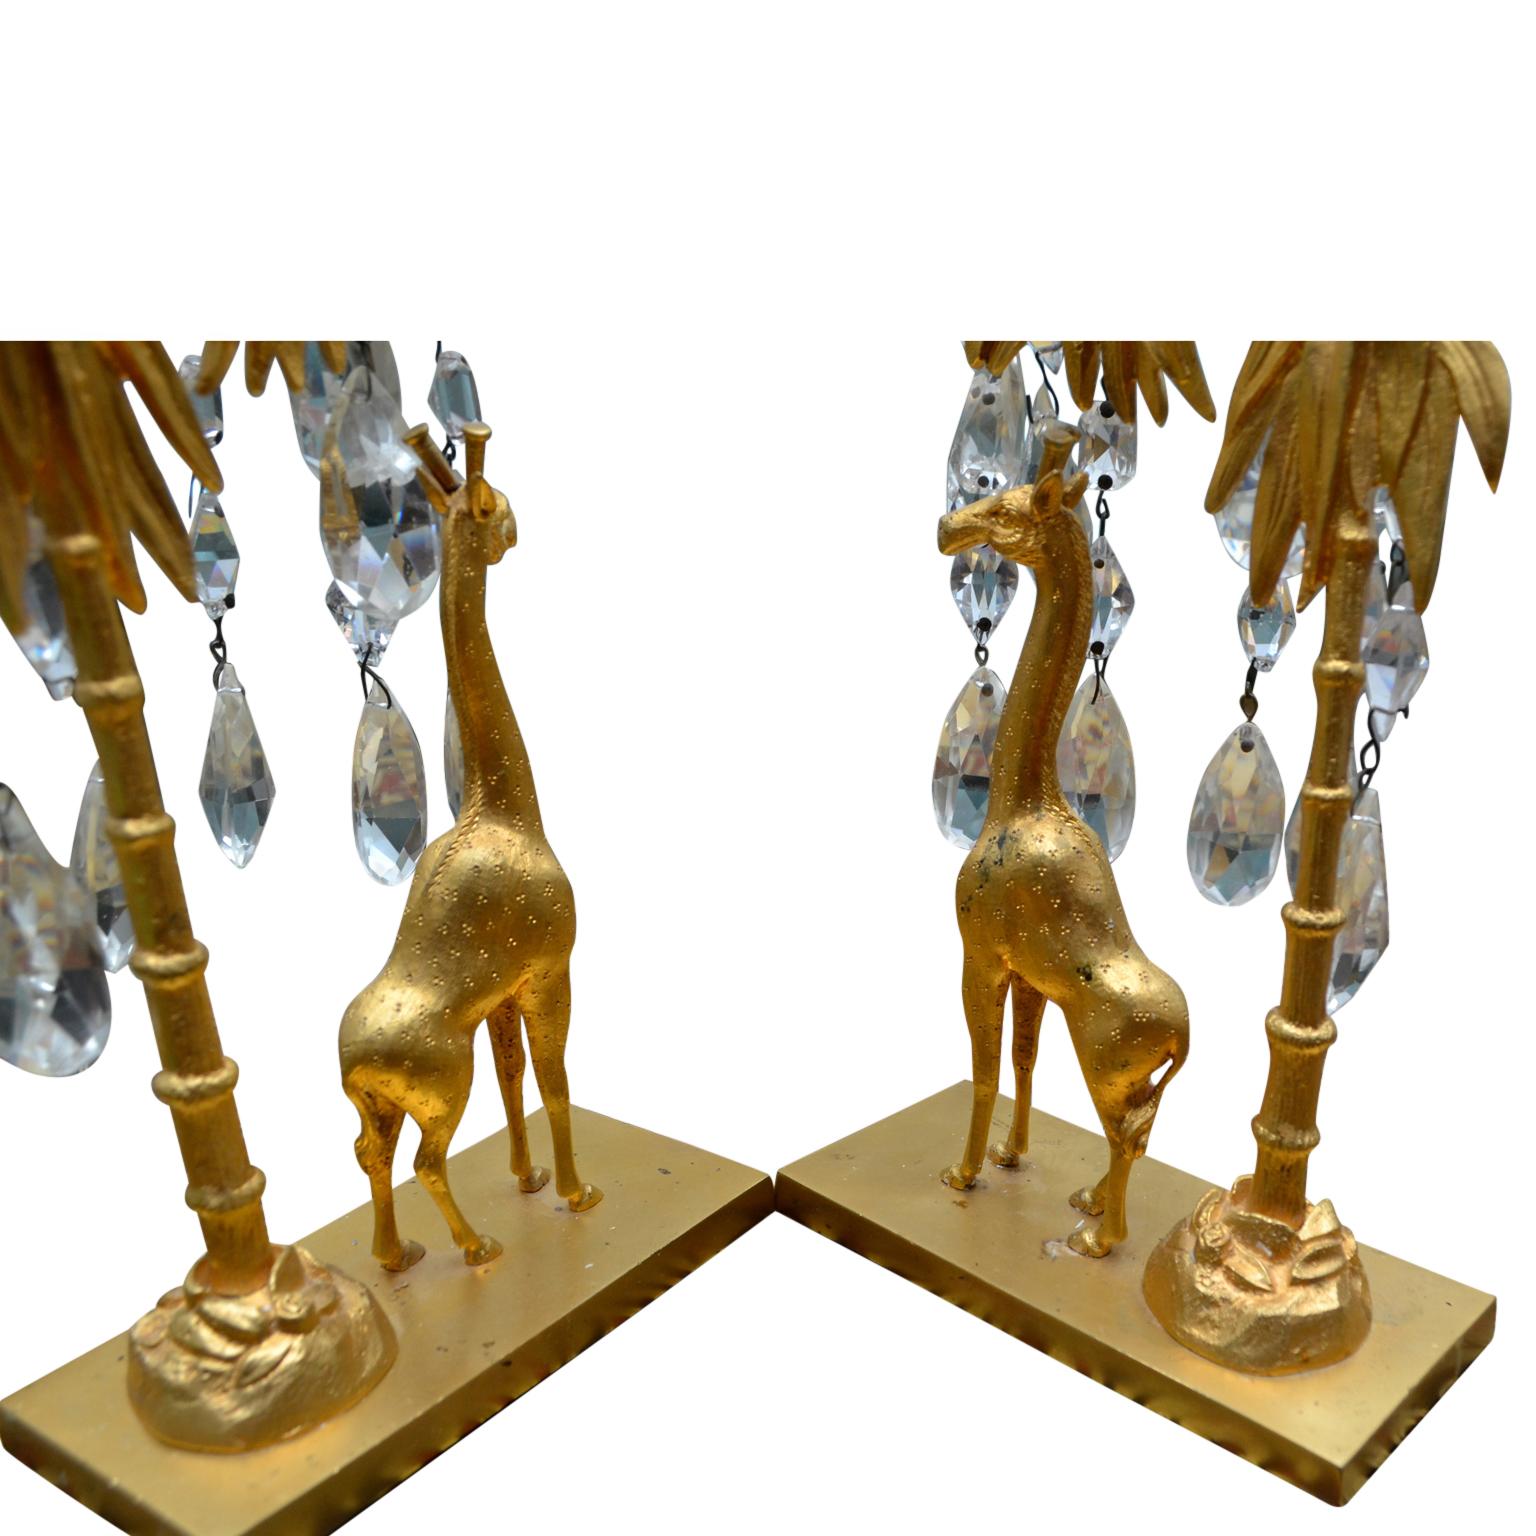 A pair of period Charles X candlesticks in gilded bronze and cut crystal. The candlesticks feature a gilt bronze giraffe standing under a 'palm tree' from which hang various sized and various shapes of finely cut crystal. The single candle nozzle is